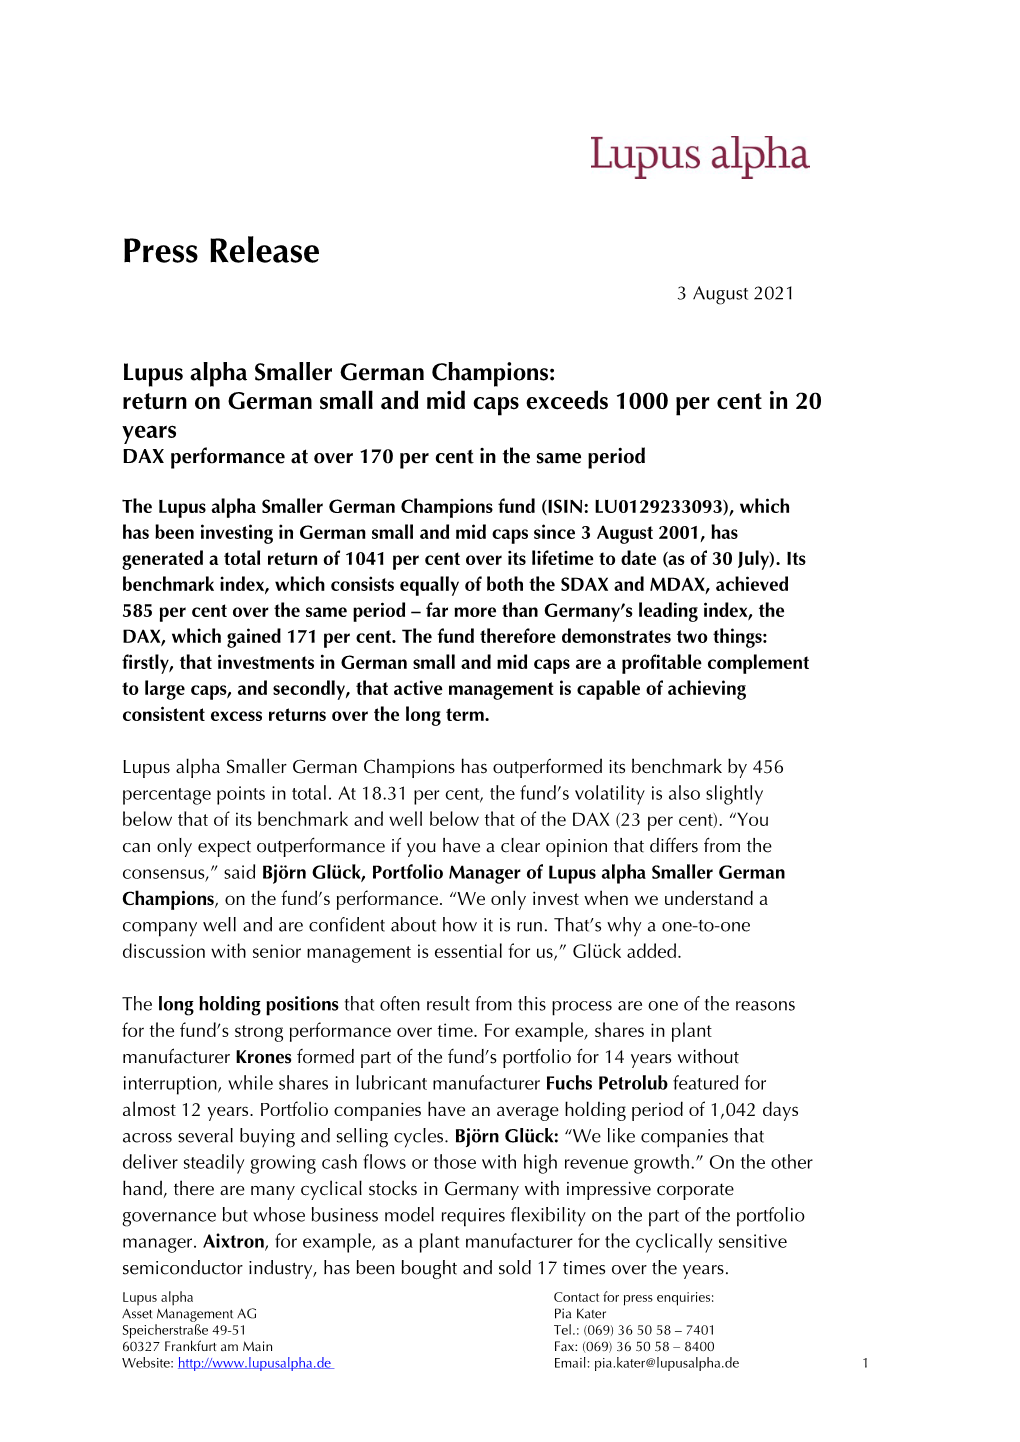 Press Release 3 August 2021